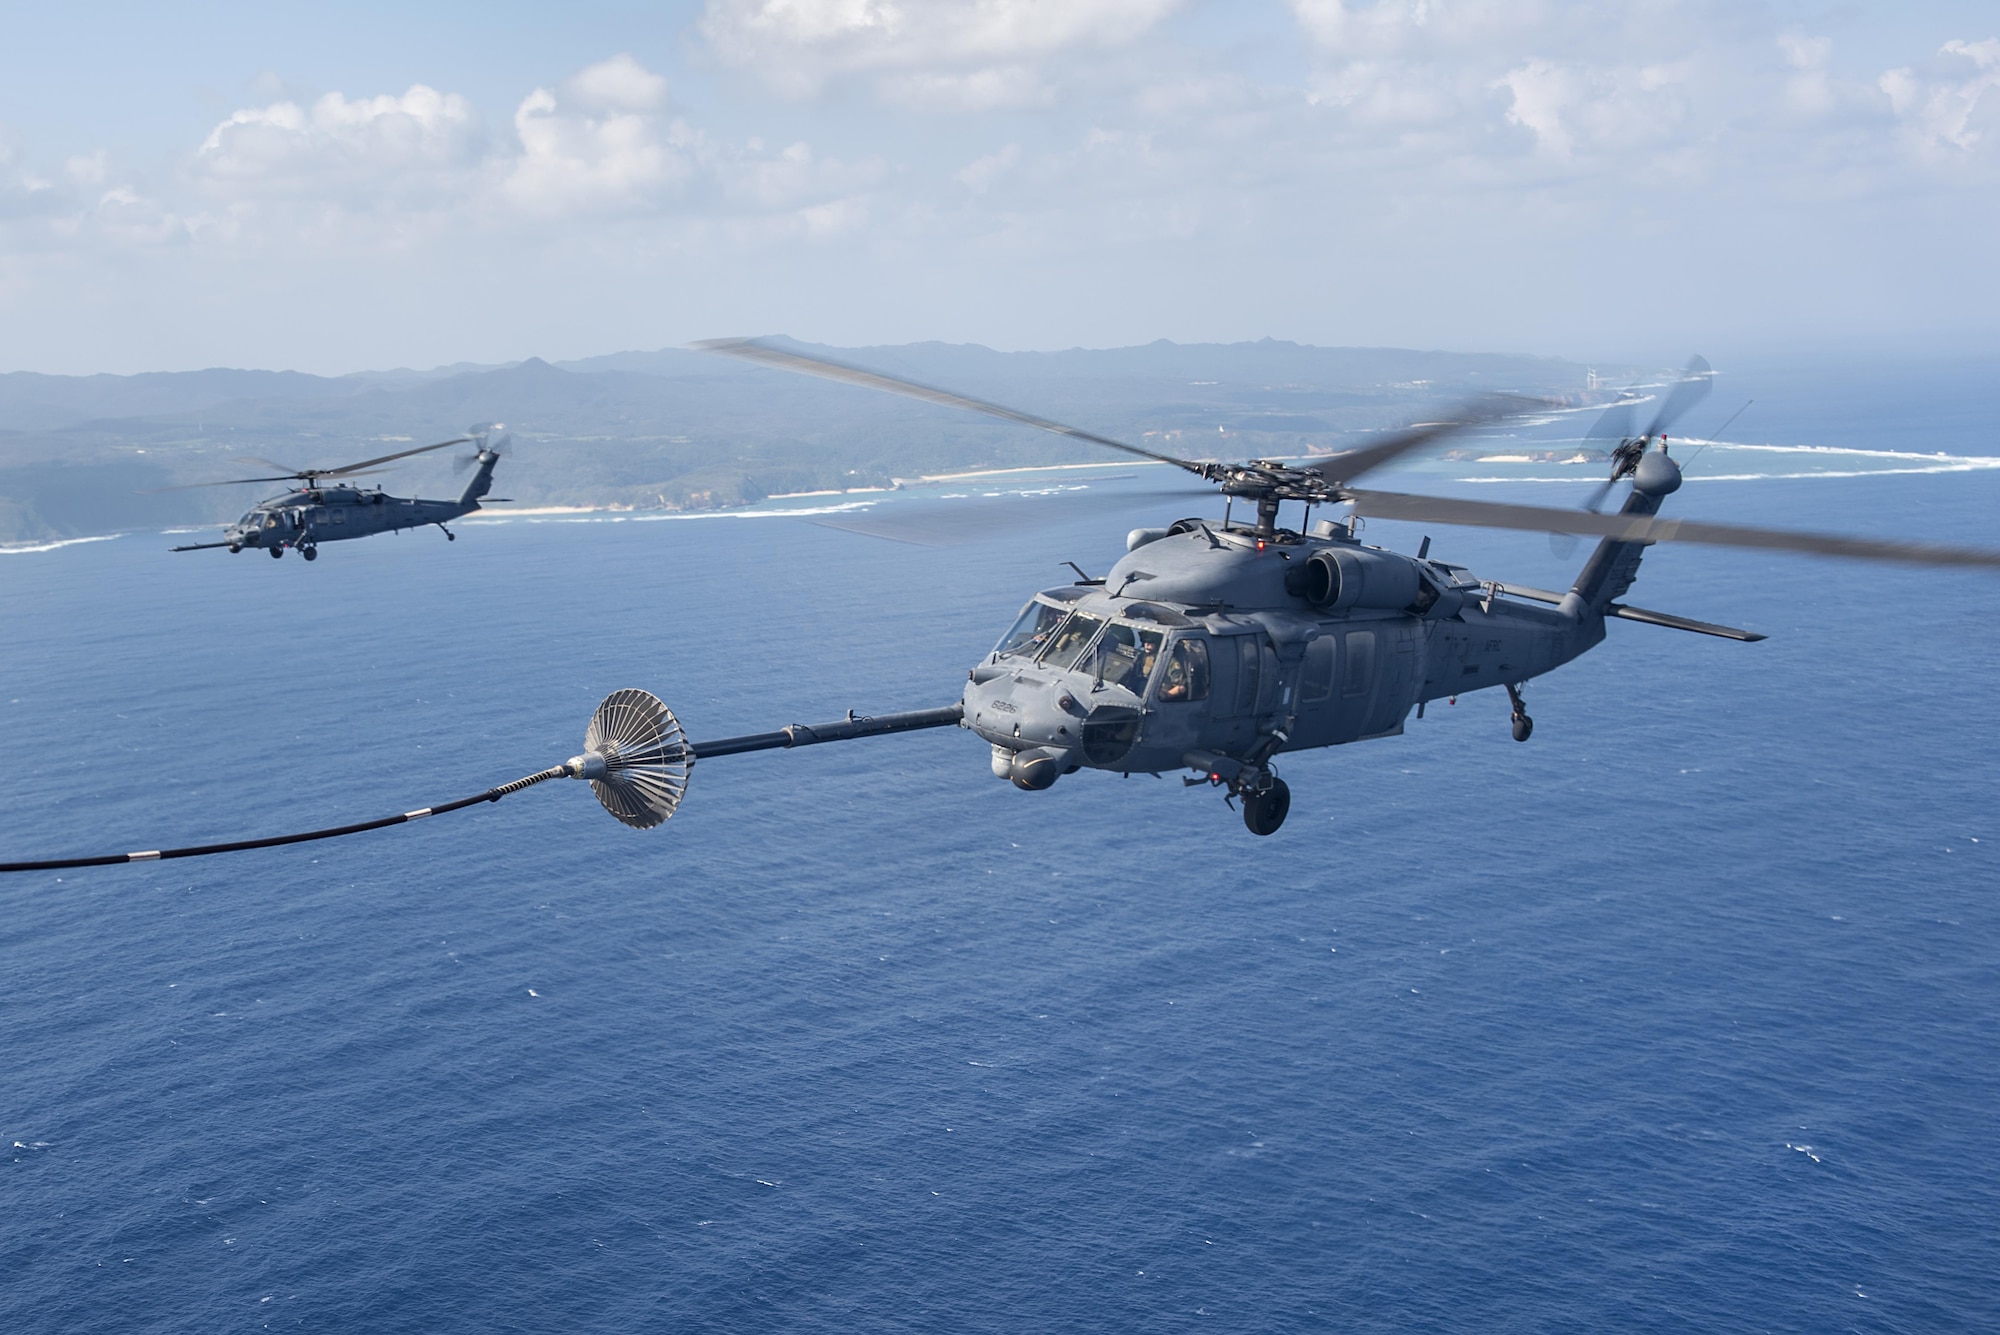 An MC-130H Combat Talon II from the 1st Special Operations Squadron refuels an HH-60 Pave Hawk from the 943rd Rescue Group during Exercise Keen Sword 17 Nov. 7, 2016, near Okinawa, Japan. U.S. forces will conduct training with their Japan Self-Defense Force counterparts at military installations throughout mainland Japan, Okinawa and in the waters surrounding Japan. (U.S. Air Force photo by Airman 1st Class Corey M. Pettis)